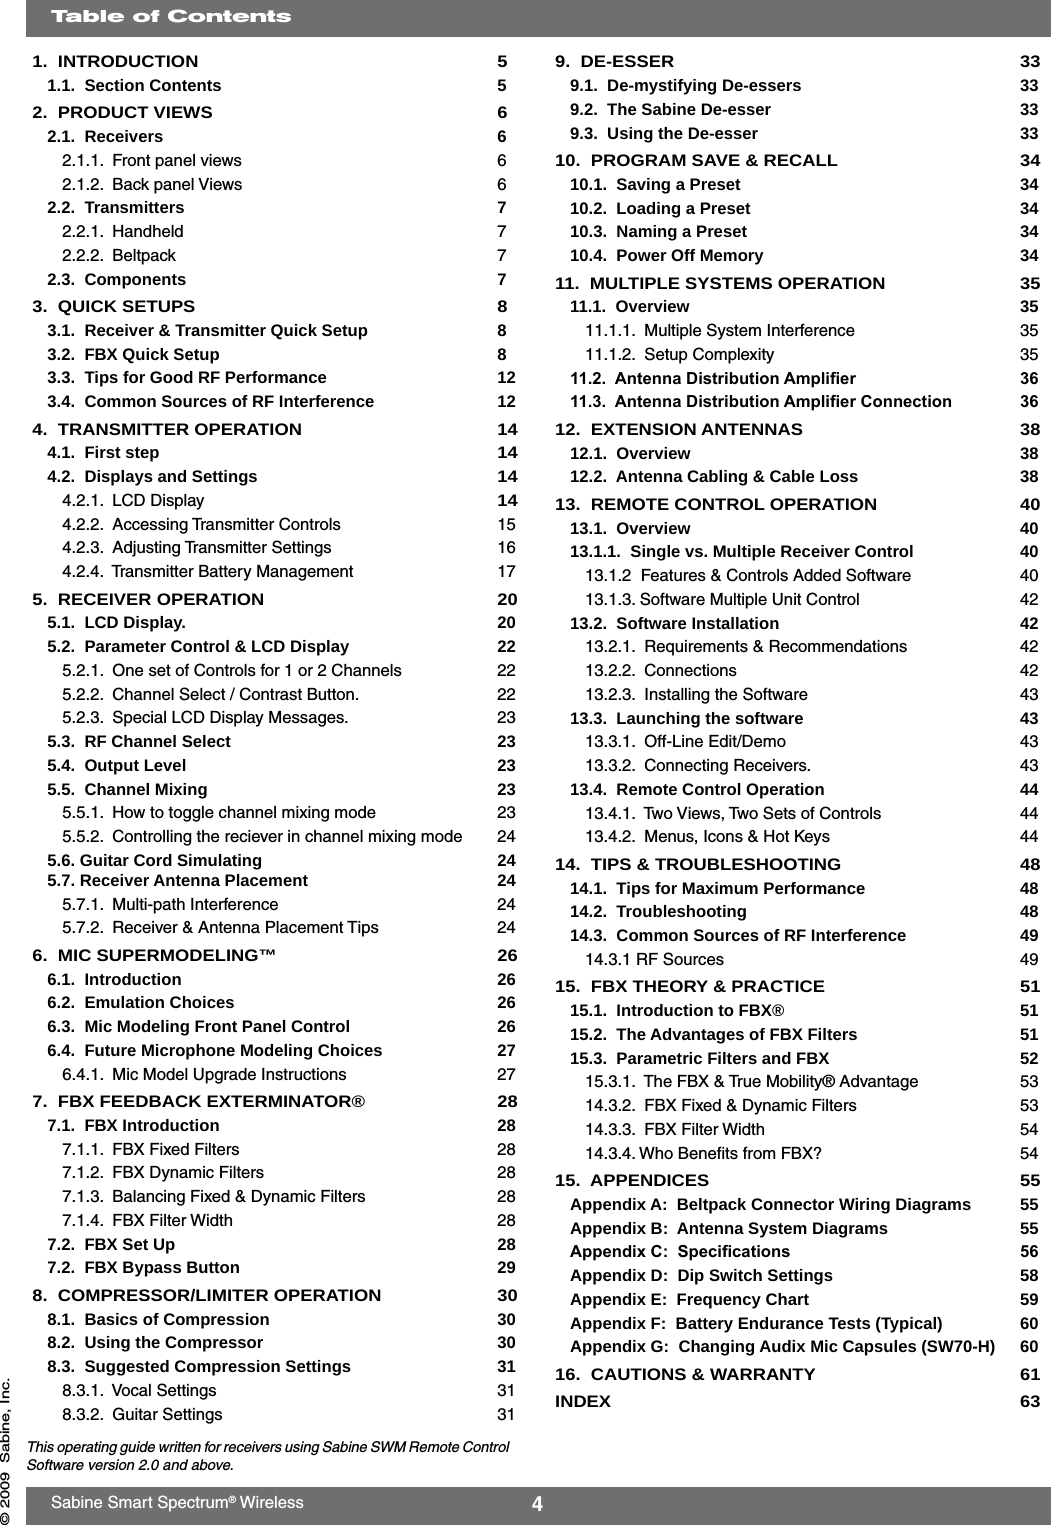 4Sabine Smart Spectrum® Wireless© 2009  Sabine, Inc.Table of ContentsThis operating guide written for receivers using Sabine SWM Remote Control Software version 2.0 and above.9.  DE-ESSER  339.1.  De-mystifying De-essers  339.2.  The Sabine De-esser  339.3.  Using the De-esser  3310.  PROGRAM SAVE &amp; RECALL  3410.1.  Saving a Preset  3410.2.  Loading a Preset  3410.3.  Naming a Preset  3410.4.  Power Off Memory  3411.  MULTIPLE SYSTEMS OPERATION  3511.1.  Overview  3511.1.1.  Multiple System Interference  3511.1.2.  Setup Complexity  3511.2.  Antenna Distribution Amplier  3611.3.  Antenna Distribution Amplier Connection  3612.  EXTENSION ANTENNAS  3812.1.  Overview  3812.2.  Antenna Cabling &amp; Cable Loss  3813.  REMOTE CONTROL OPERATION  4013.1.  Overview  4013.1.1.  Single vs. Multiple Receiver Control   4013.1.2  Features &amp; Controls Added Software  4013.1.3. Software Multiple Unit Control  4213.2.  Software Installation   4213.2.1.  Requirements &amp; Recommendations  4213.2.2.  Connections  4213.2.3.  Installing the Software  4313.3.  Launching the software  4313.3.1.  Off-Line Edit/Demo  4313.3.2.  Connecting Receivers.  4313.4.  Remote Control Operation  4413.4.1.  Two Views, Two Sets of Controls  4413.4.2.  Menus, Icons &amp; Hot Keys  4414.  TIPS &amp; TROUBLESHOOTING  4814.1.  Tips for Maximum Performance  4814.2.  Troubleshooting  4814.3.  Common Sources of RF Interference  4914.3.1 RF Sources  4915.  FBX THEORY &amp; PRACTICE  5115.1.  Introduction to FBX®  5115.2.  The Advantages of FBX Filters    5115.3.  Parametric Filters and FBX  5215.3.1.  The FBX &amp; True Mobility® Advantage   5314.3.2.  FBX Fixed &amp; Dynamic Filters  5314.3.3.  FBX Filter Width  5414.3.4. Who Beneﬁts from FBX?  5415.  APPENDICES  55Appendix A:  Beltpack Connector Wiring Diagrams  55Appendix B:  Antenna System Diagrams  55Appendix C:  Specications  56Appendix D:  Dip Switch Settings  58Appendix E:  Frequency Chart  59Appendix F:  Battery Endurance Tests (Typical)  60Appendix G:  Changing Audix Mic Capsules (SW70-H)  6016.  CAUTIONS &amp; WARRANTY  61INDEX  631.  INTRODUCTION  51.1.  Section Contents  52.  PRODUCT VIEWS  62.1.  Receivers  62.1.1.  Front panel views  62.1.2.  Back panel Views  62.2.  Transmitters  72.2.1.  Handheld  72.2.2.  Beltpack  72.3.  Components  73.  QUICK SETUPS  83.1.  Receiver &amp; Transmitter Quick Setup   83.2.  FBX Quick Setup  83.3.  Tips for Good RF Performance  123.4.  Common Sources of RF Interference  124.  TRANSMITTER OPERATION  144.1.  First step 144.2.  Displays and Settings 144.2.1.  LCD Display 144.2.2.  Accessing Transmitter Controls  154.2.3.  Adjusting Transmitter Settings  164.2.4.  Transmitter Battery Management  175.  RECEIVER OPERATION  205.1.  LCD Display.   205.2.  Parameter Control &amp; LCD Display  225.2.1.  One set of Controls for 1 or 2 Channels  225.2.2.  Channel Select / Contrast Button.  225.2.3.  Special LCD Display Messages.  235.3.  RF Channel Select  235.4.  Output Level  235.5.  Channel Mixing  235.5.1.  How to toggle channel mixing mode  235.5.2.  Controlling the reciever in channel mixing mode  245.6. Guitar Cord Simulating  24 5.7. Receiver Antenna Placement   245.7.1.  Multi-path Interference  245.7.2.  Receiver &amp; Antenna Placement Tips  246.  MIC SUPERMODELING™  266.1.  Introduction  266.2.  Emulation Choices  266.3.  Mic Modeling Front Panel Control  266.4.  Future Microphone Modeling Choices  276.4.1.  Mic Model Upgrade Instructions  277.  FBX FEEDBACK EXTERMINATOR®  287.1.  FBX Introduction  287.1.1.  FBX Fixed Filters  287.1.2.  FBX Dynamic Filters  287.1.3.  Balancing Fixed &amp; Dynamic Filters  287.1.4.  FBX Filter Width  287.2.  FBX Set Up  287.2.  FBX Bypass Button  298.  COMPRESSOR/LIMITER OPERATION  308.1.  Basics of Compression  308.2.  Using the Compressor  308.3.  Suggested Compression Settings  318.3.1.  Vocal Settings  318.3.2.  Guitar Settings  31